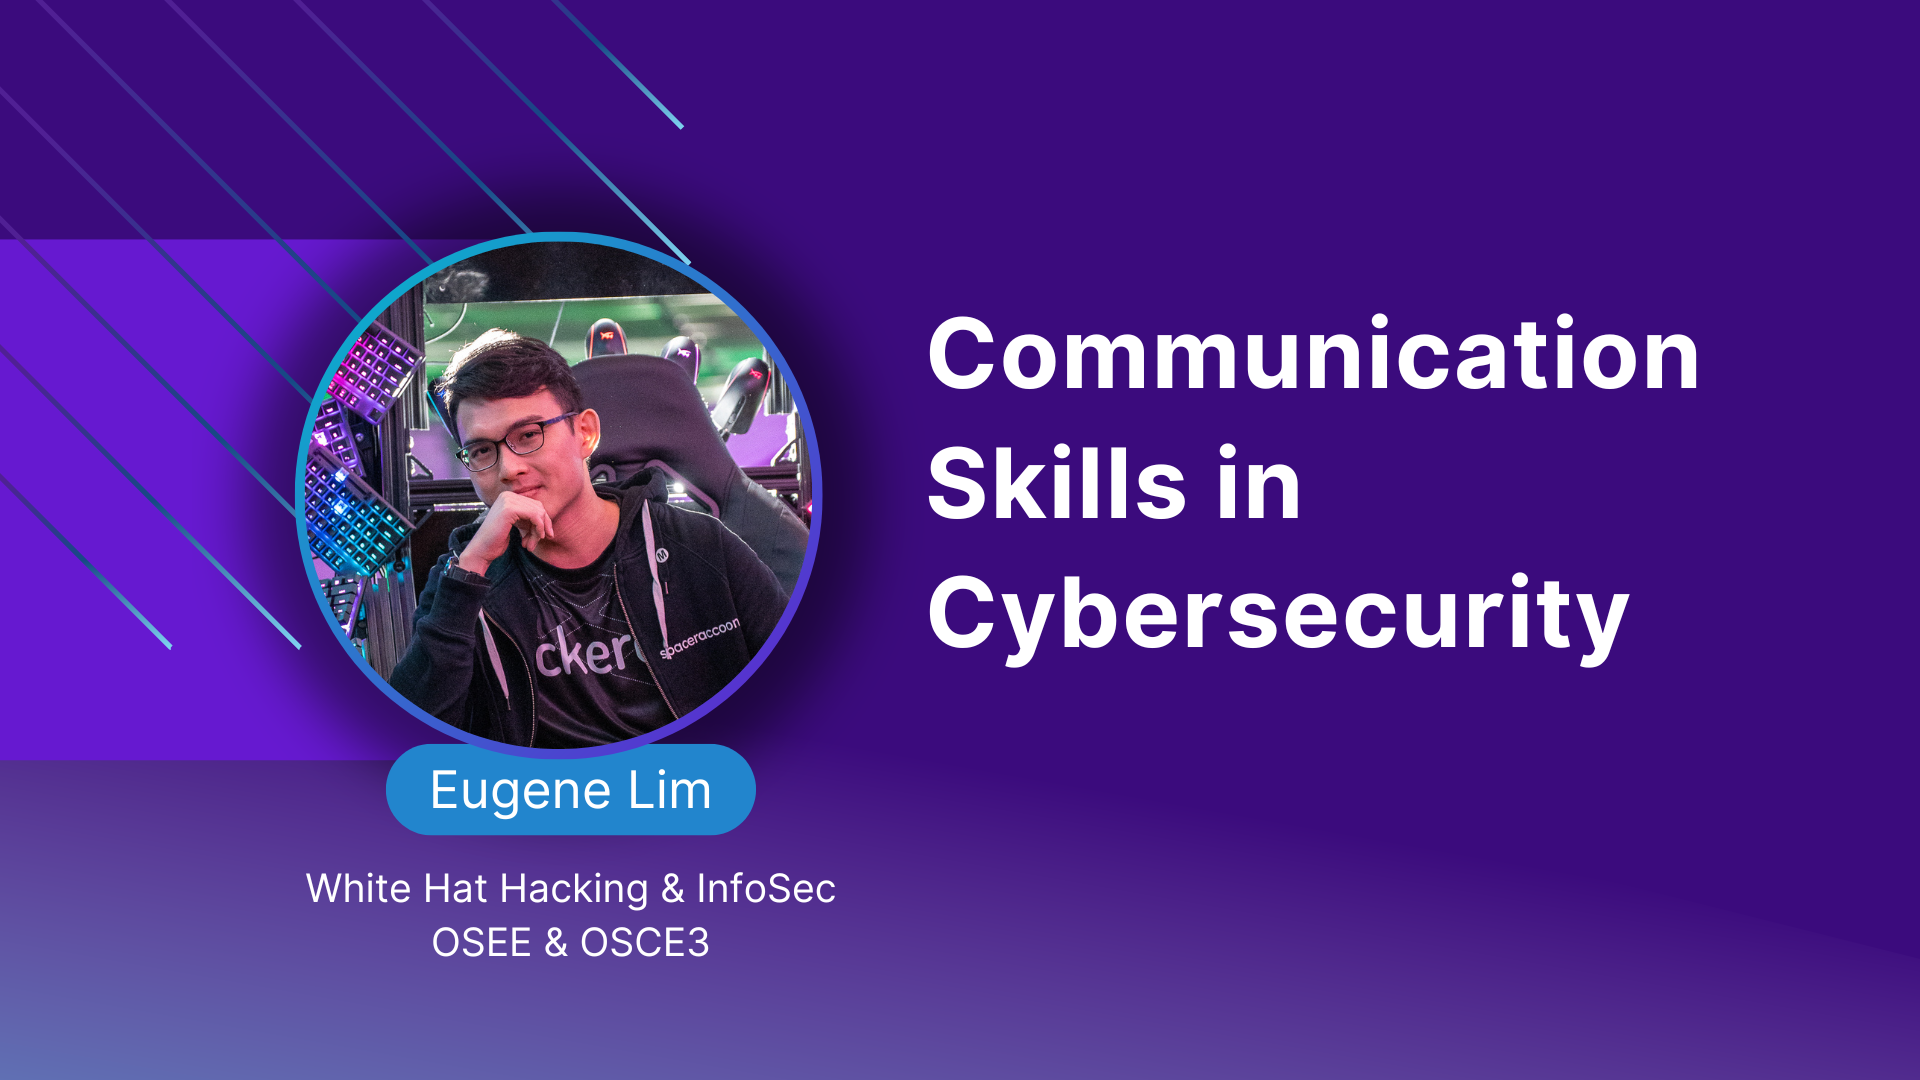 Communication Skills in Cybersecurity